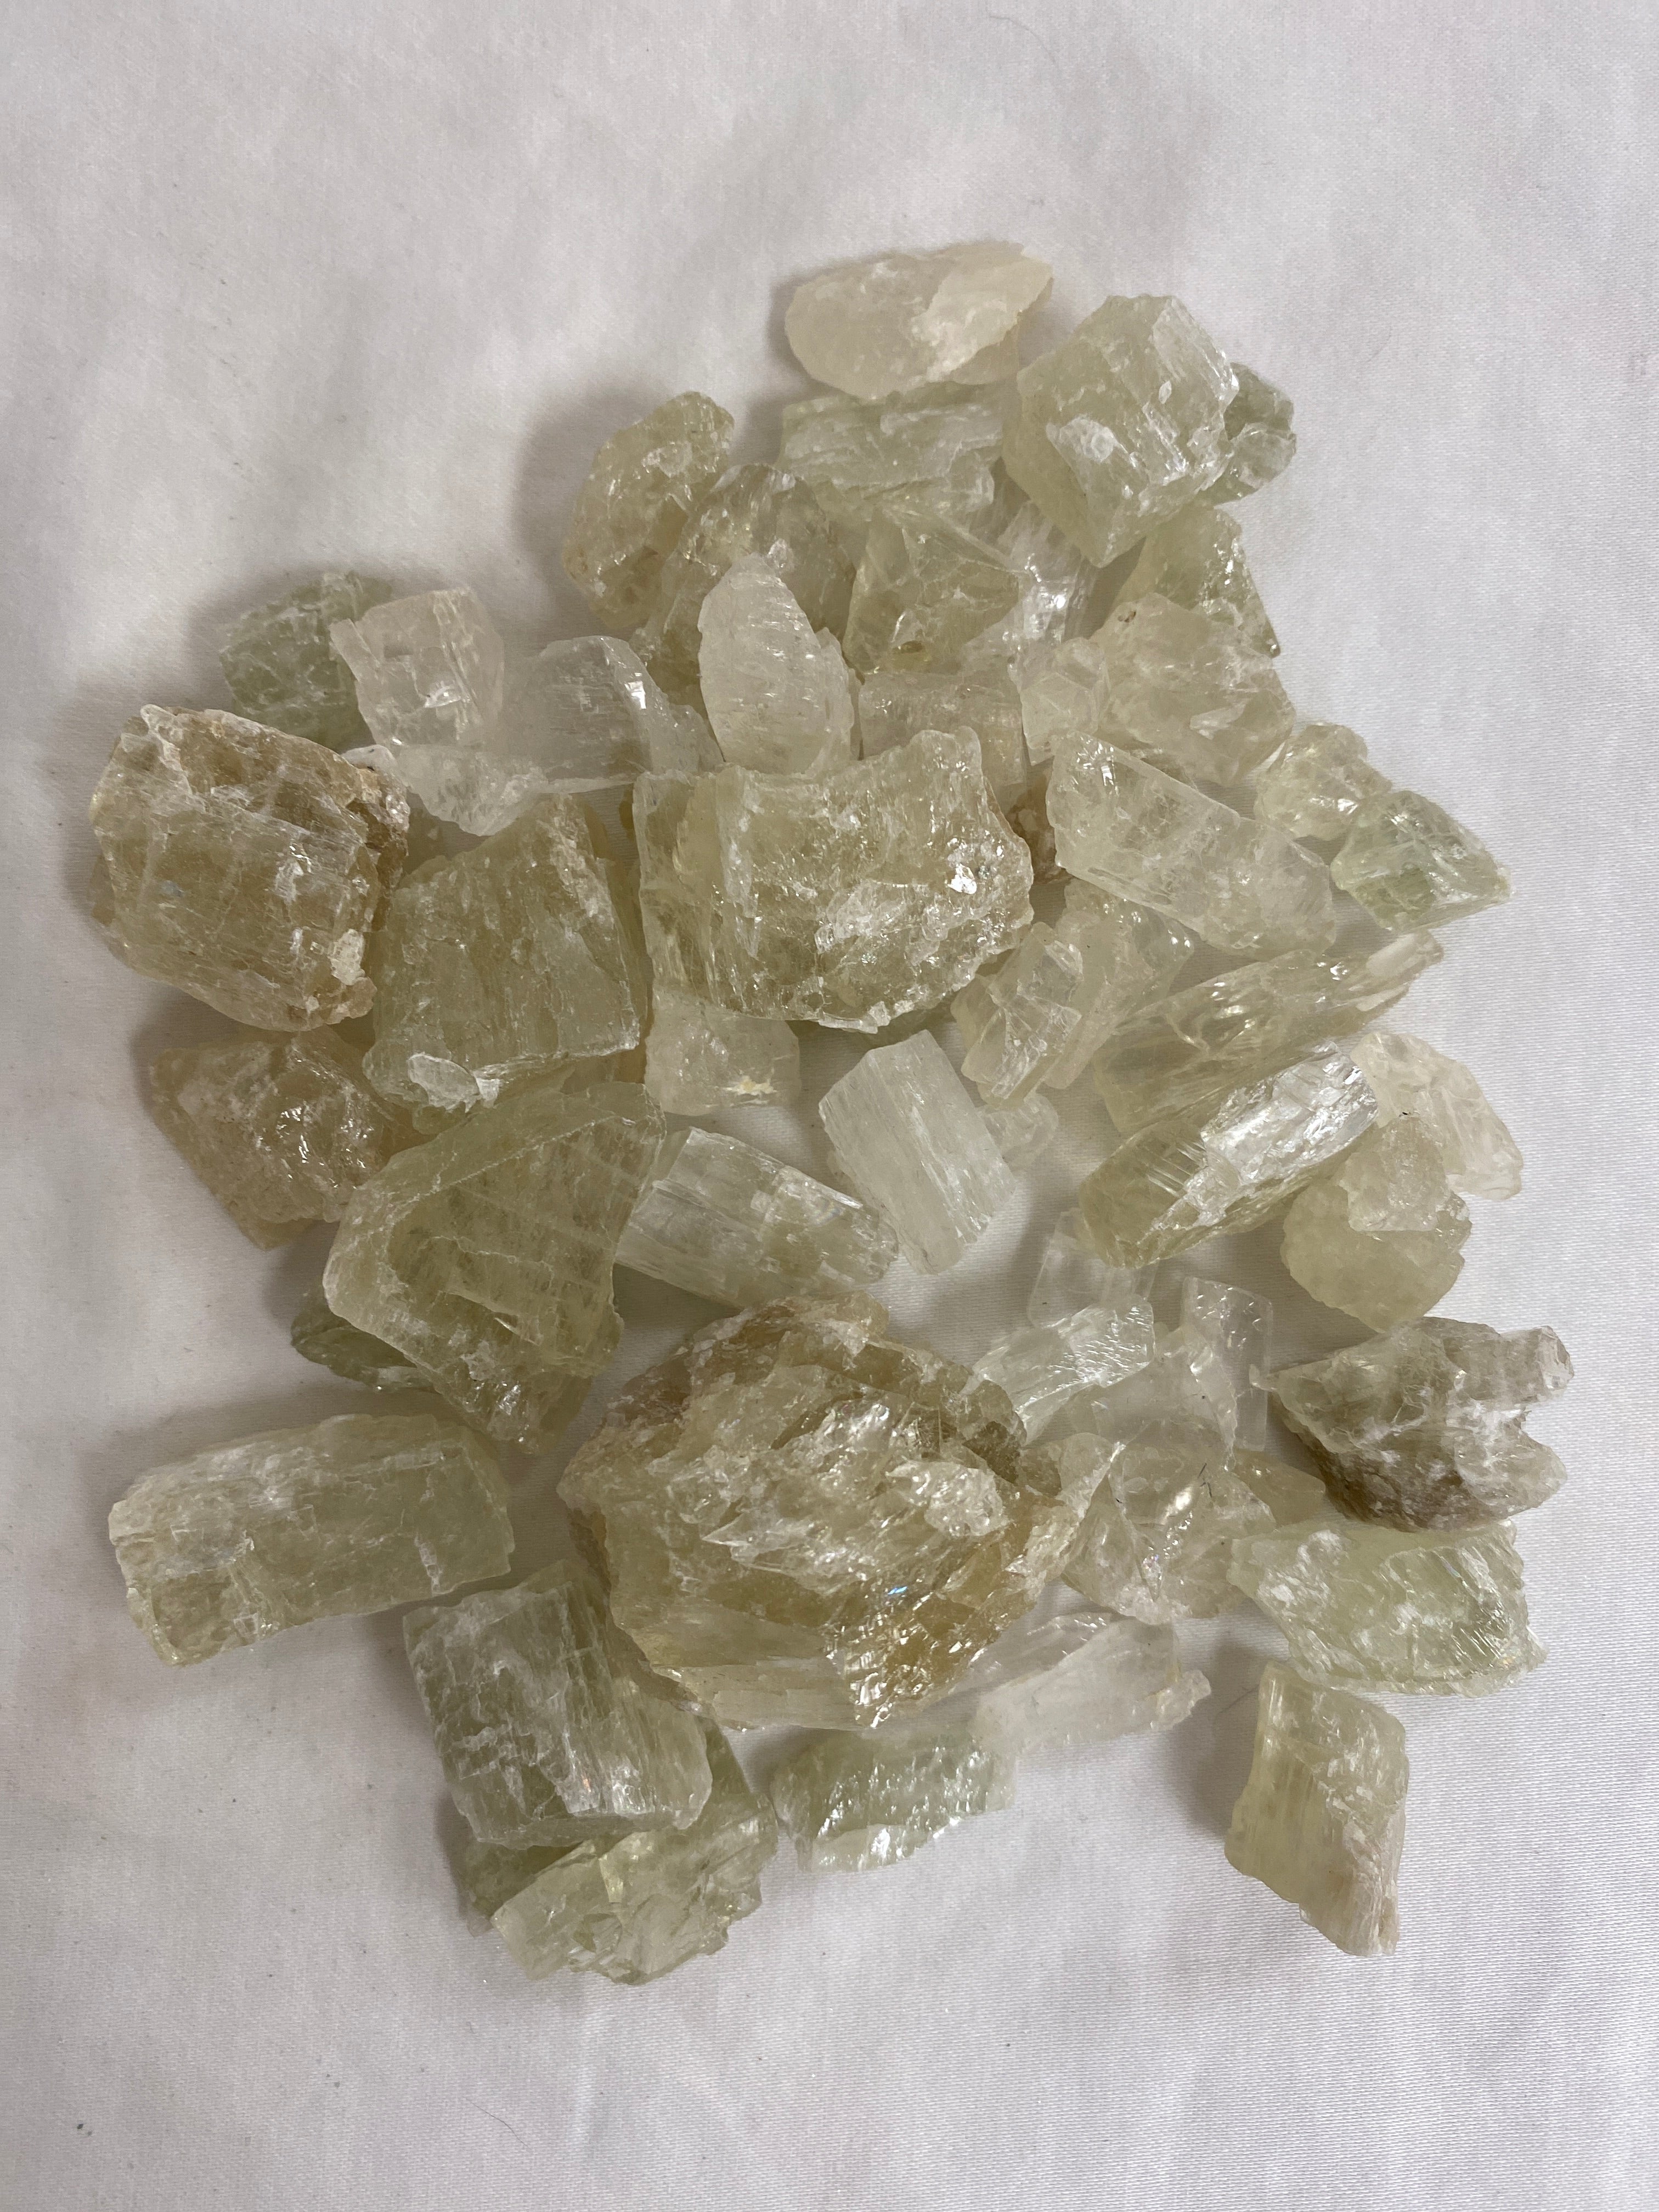 A cluster of raw Hiddenite stones with a natural, rough texture and a vibrant green color. The stones are irregular in shape and size, with some showing signs of cleavage and others with smooth, rounded surfaces.